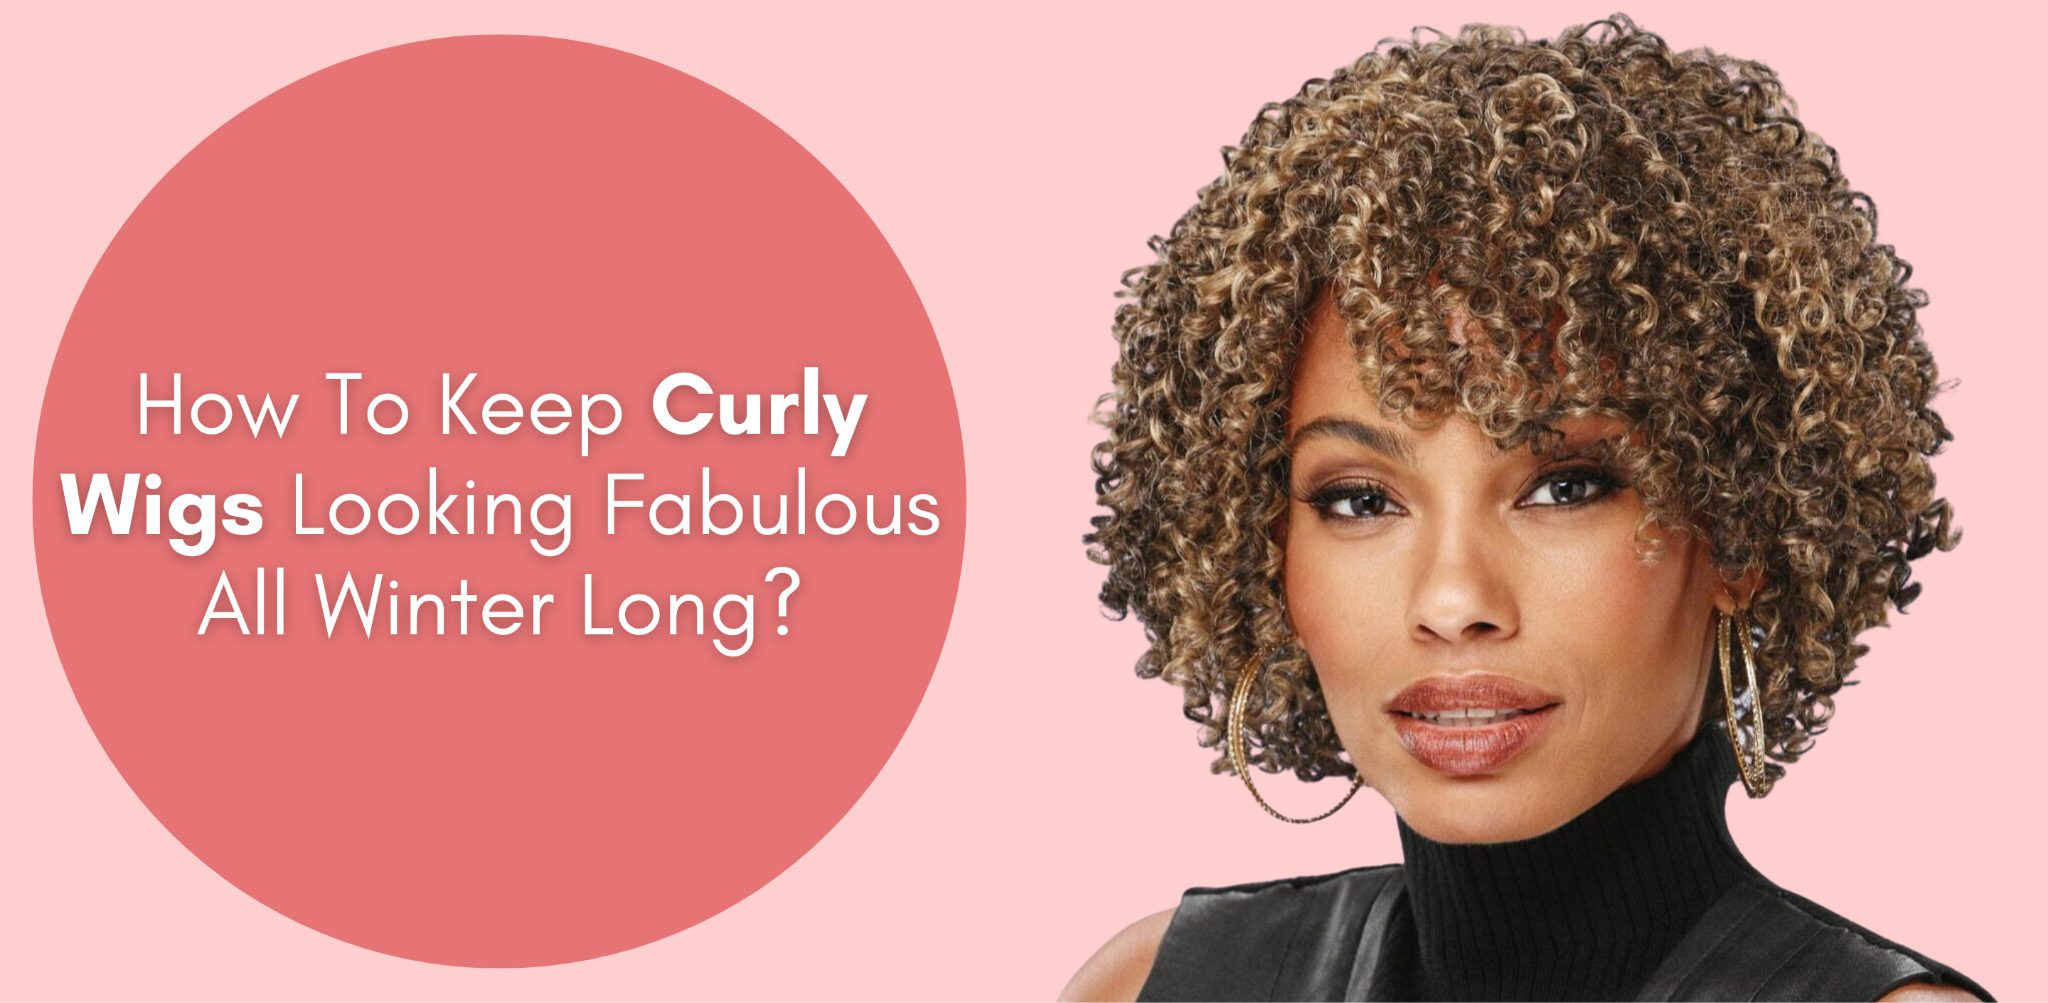 How To Keep Curly Wigs Looking Fabulous All Winter Long?